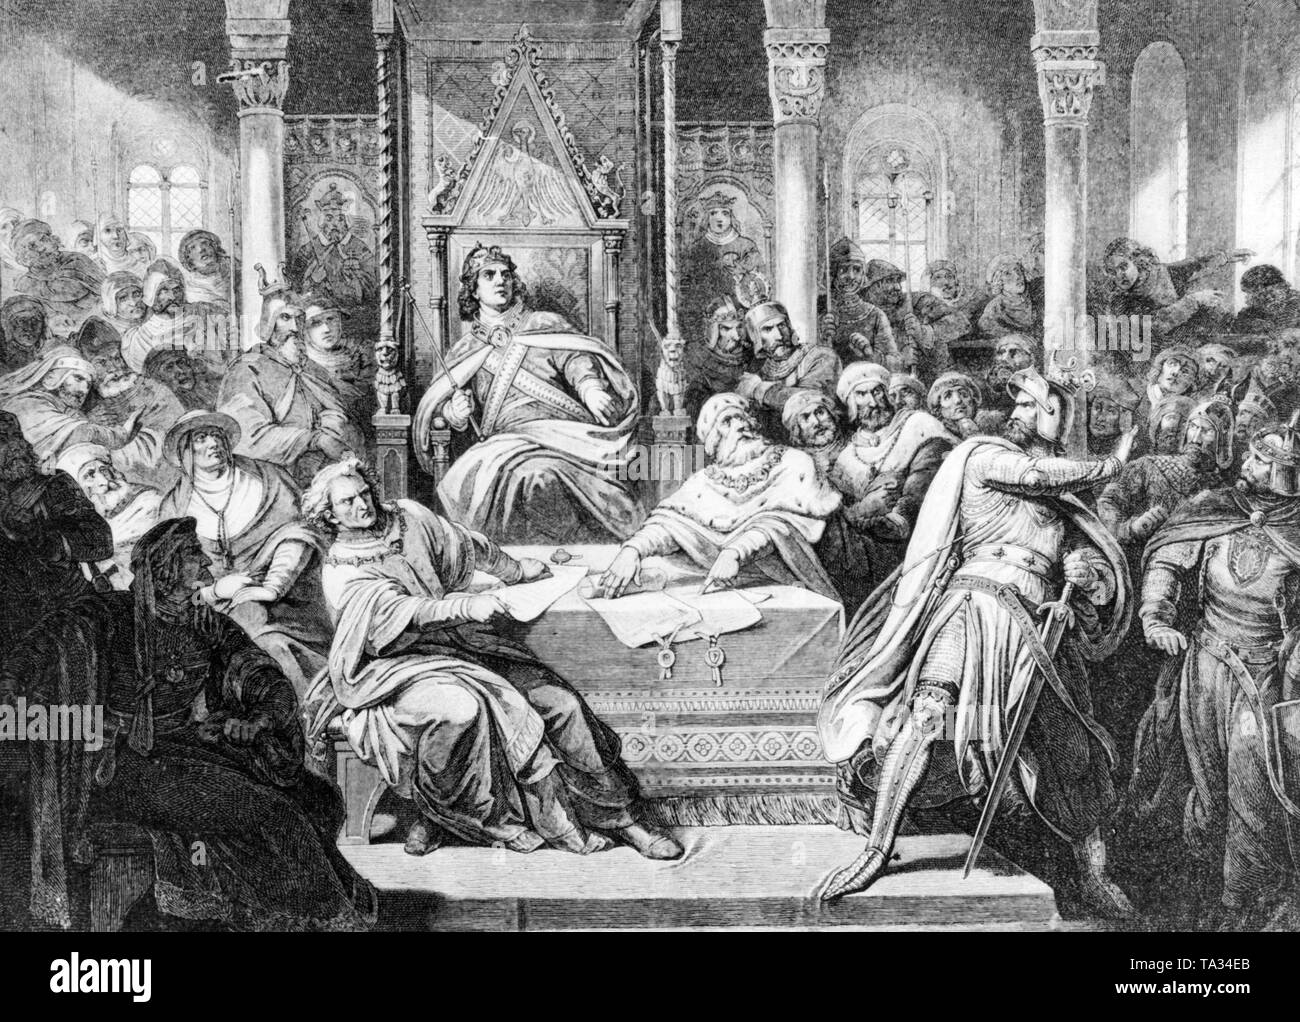 King Henry VII on the Reichstag (imperial diet), actually Hoftag (court council), at Speyer. The drawing depicts the defense speech of Count Eberhard of Wurttemberg called Illustrious, before the King. The subject of the speech was Eberhard's indictments concerning the pillage of the Swabian imperial cities. Stock Photo